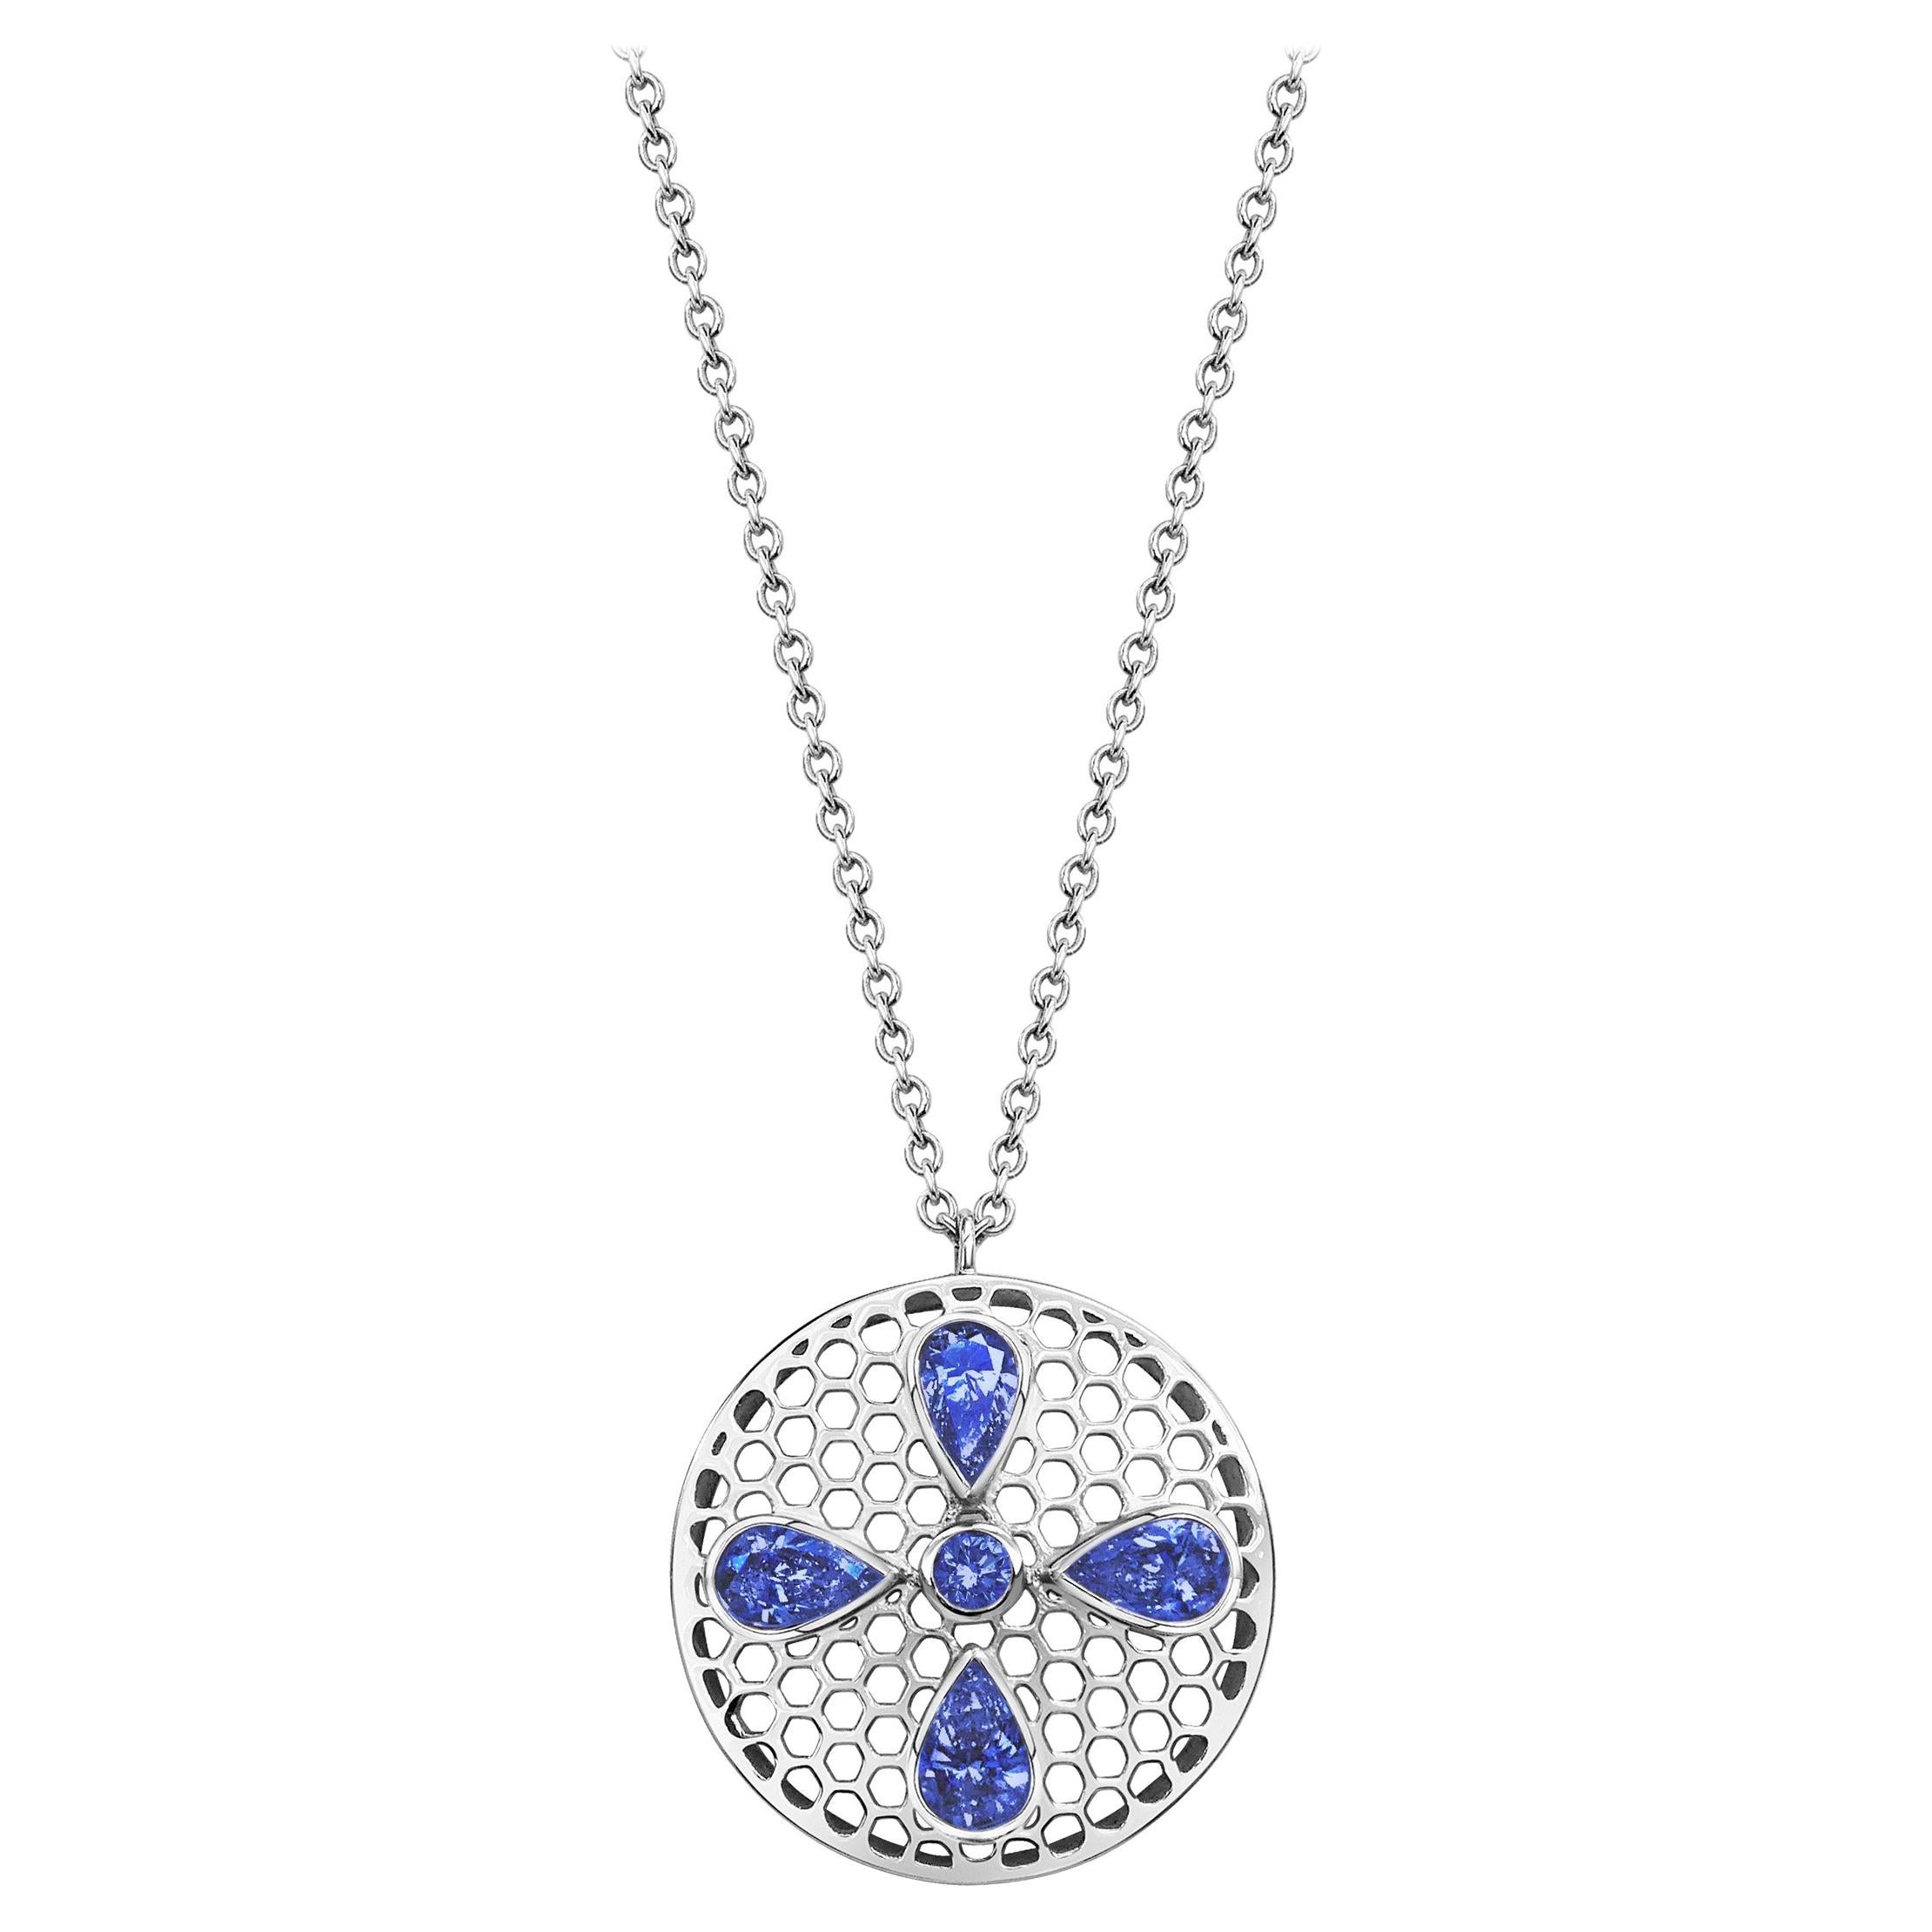 Handcrafted Tanzanites and 18 Karat White Gold Pendant Necklace